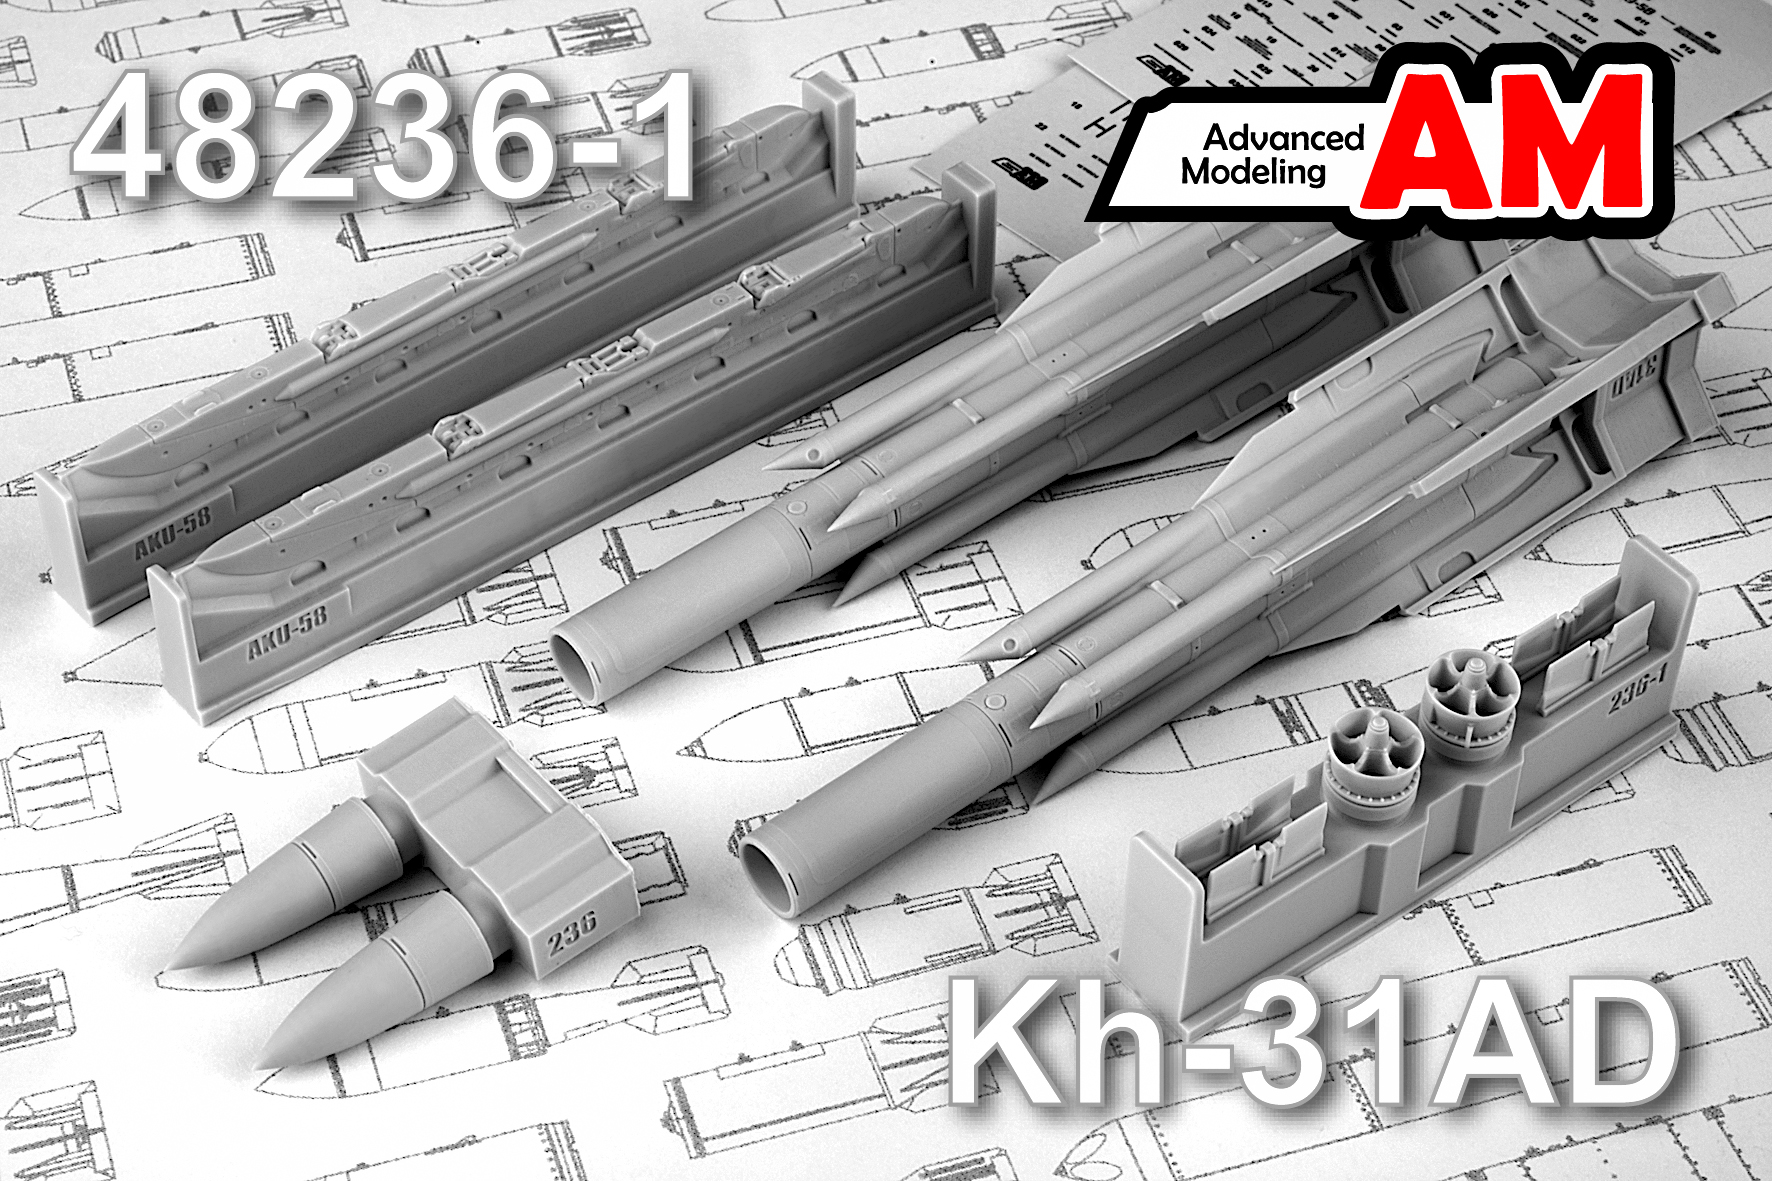 Additions (3D resin printing) 1/48 Aircraft guided missile Kh-31AD with launcher AKU-58 (Advanced Modeling) 